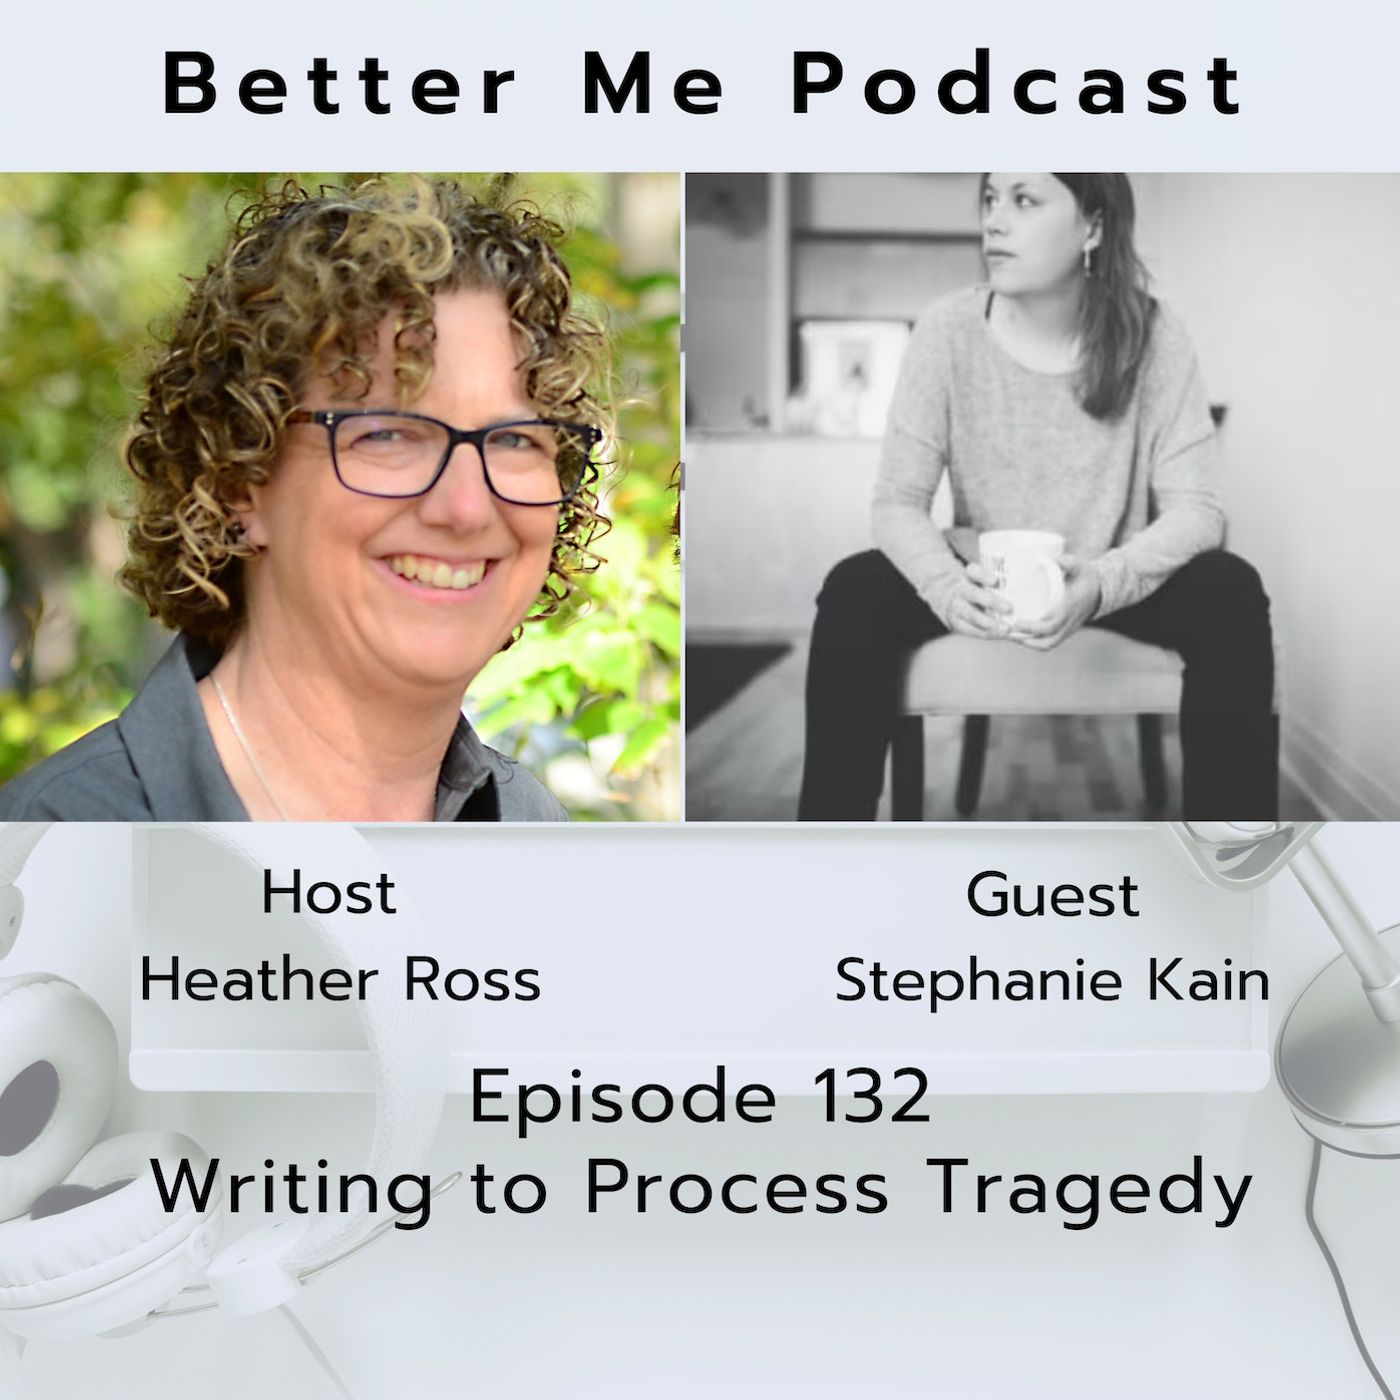 EP 132 Writing to Process Tragedy (with guest Stephanie Kain)